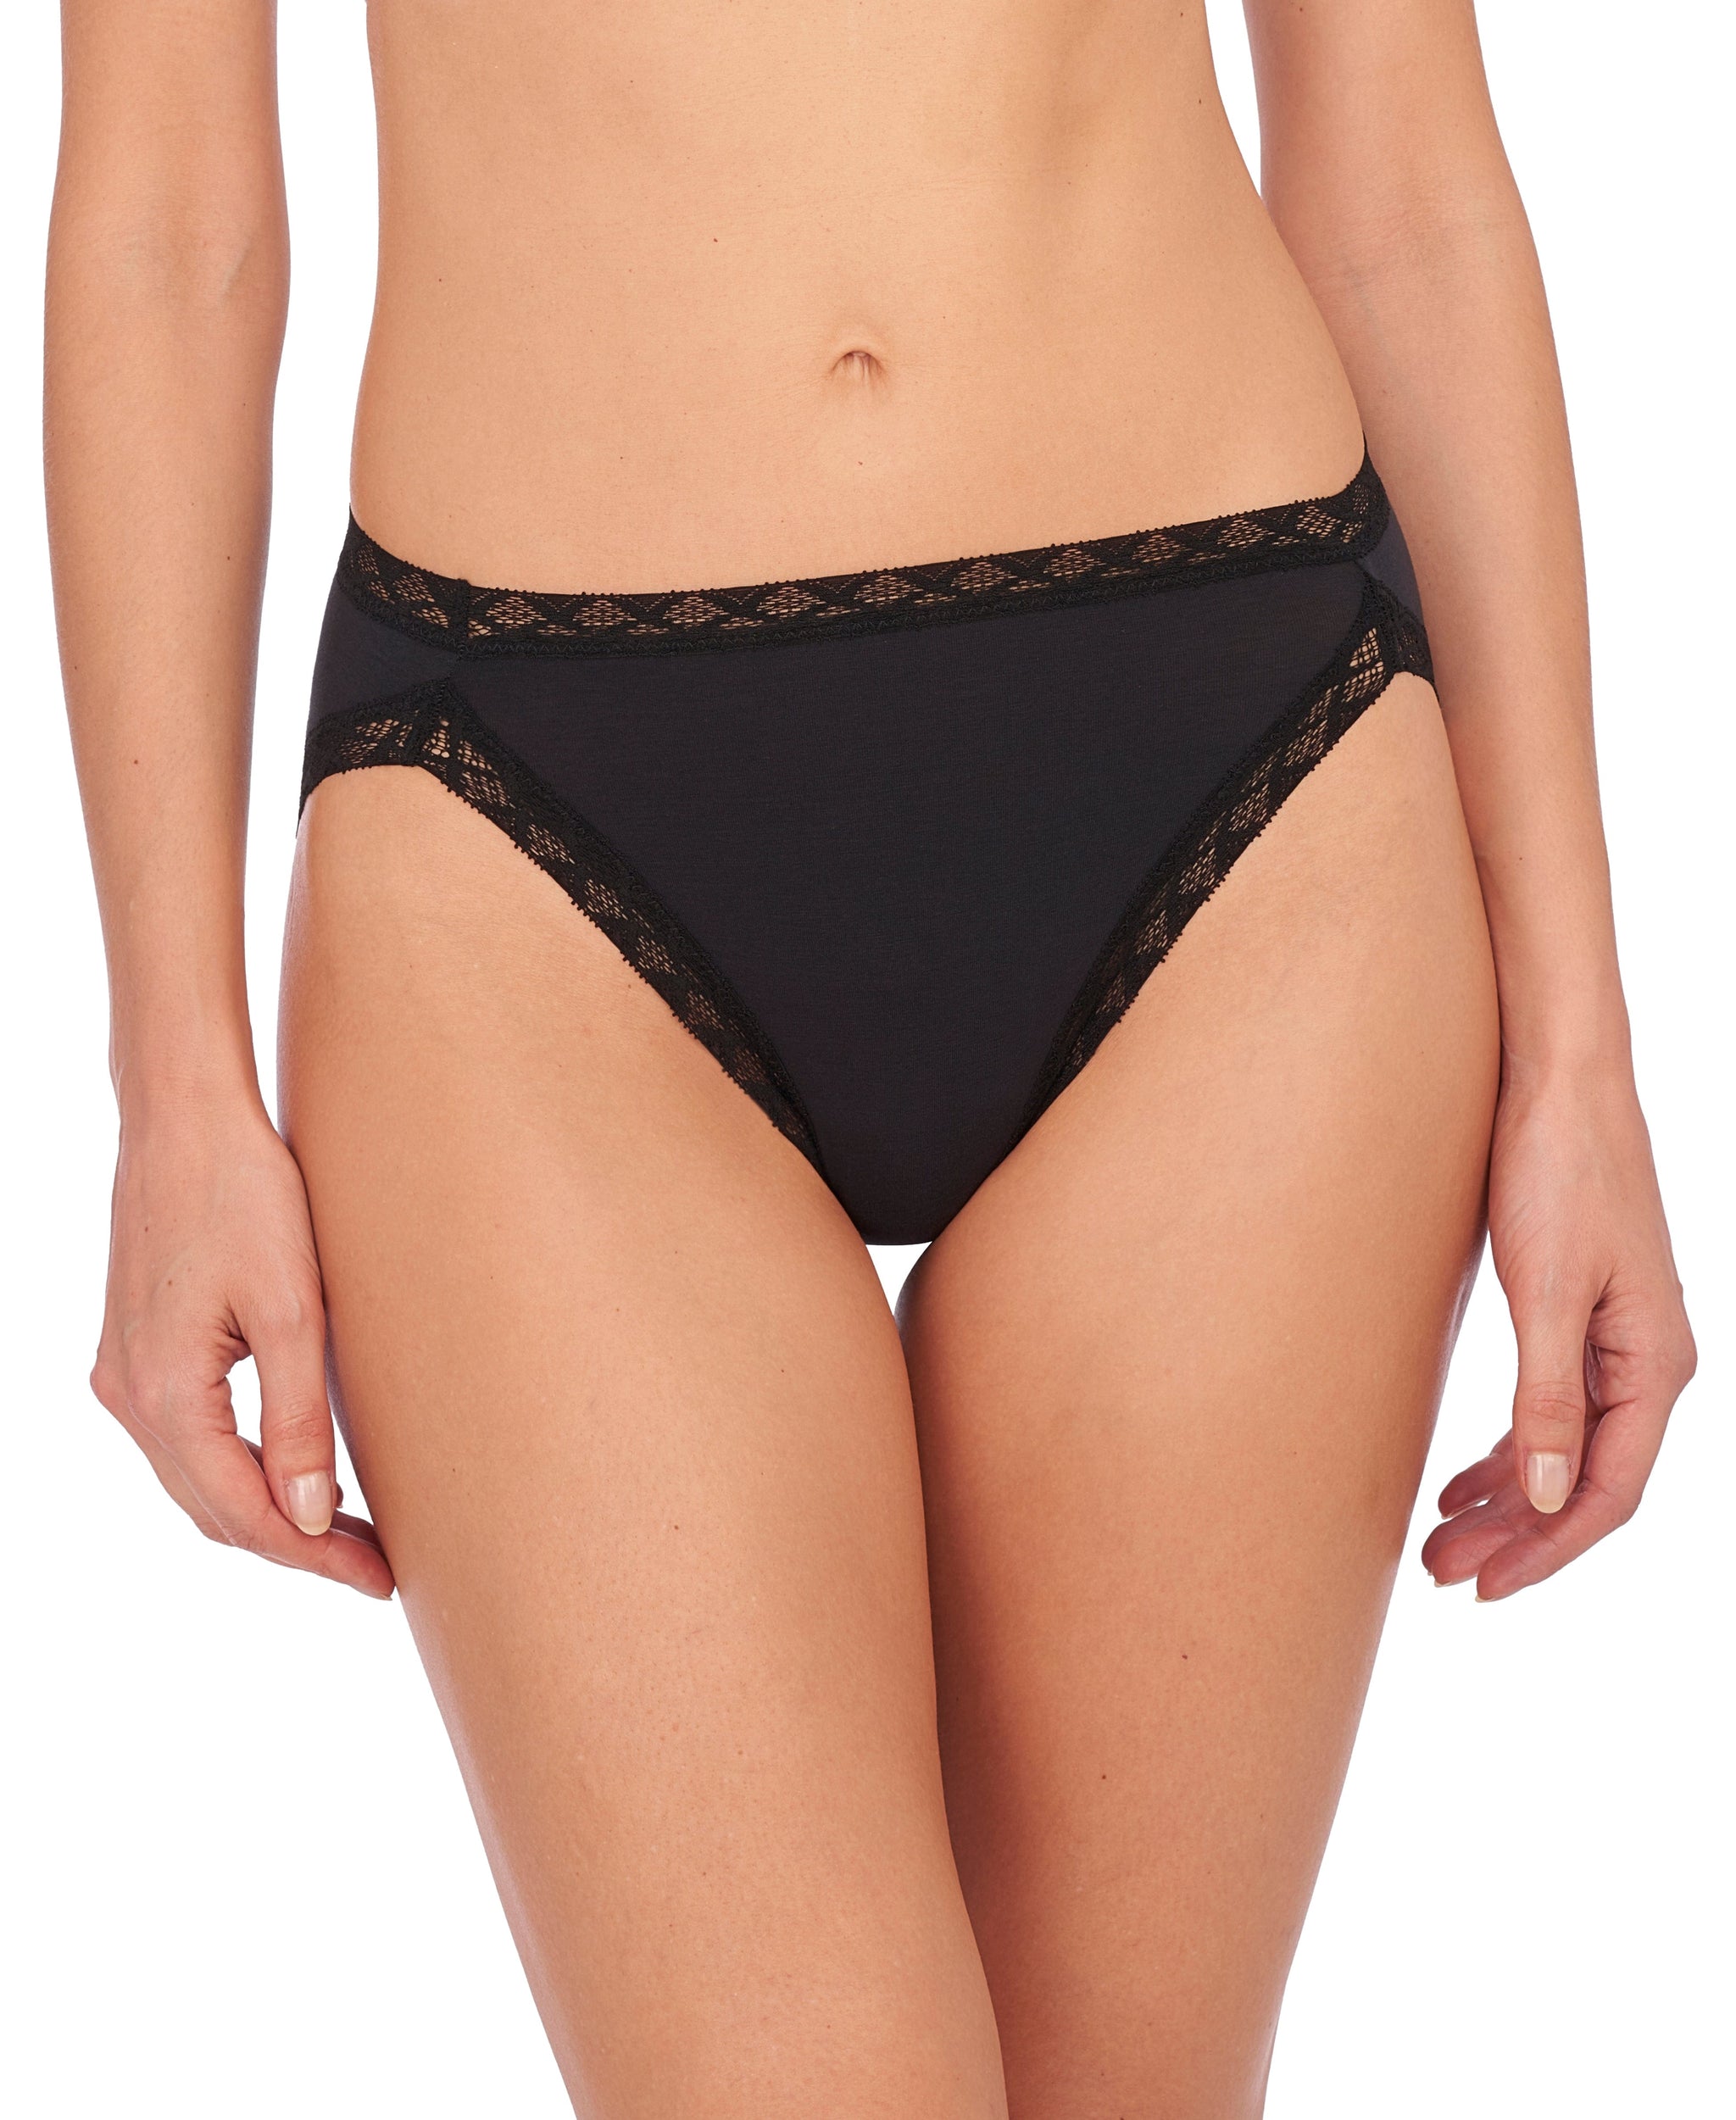 Bliss French Cut Panty - Black - Chérie Amour